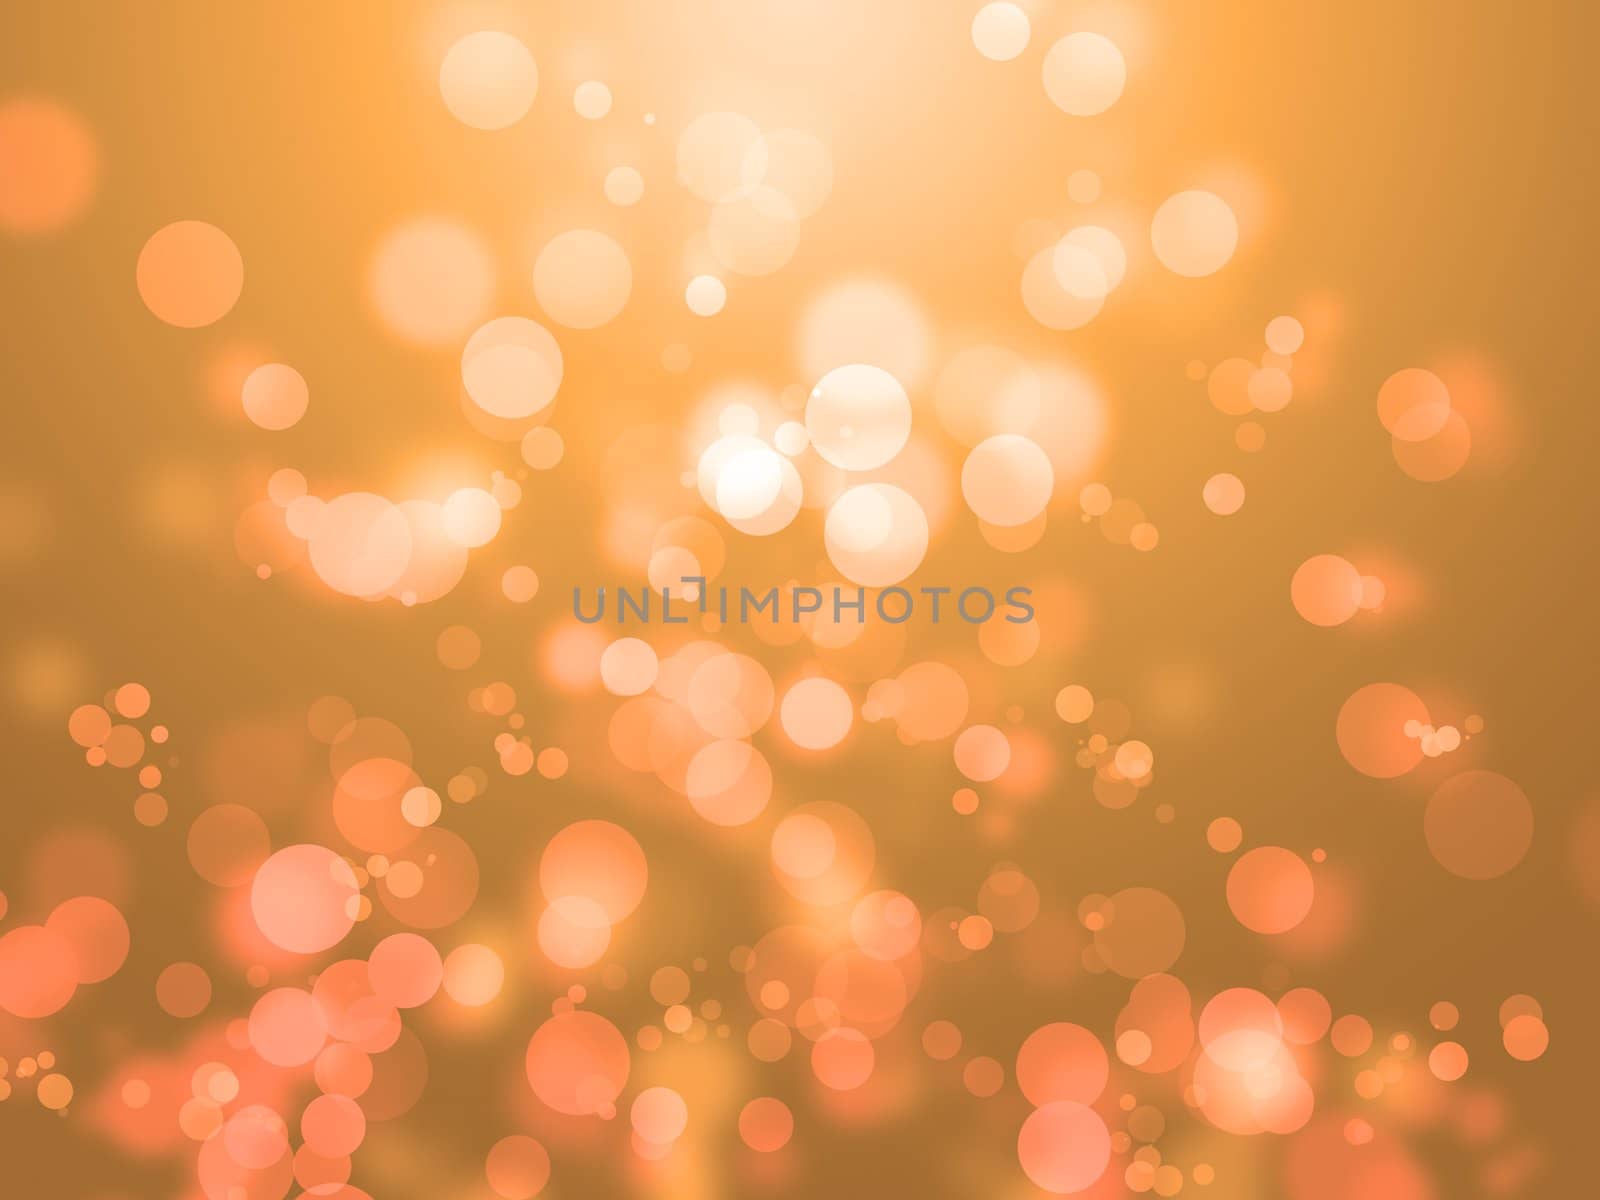 Bright background with colorful sparkles